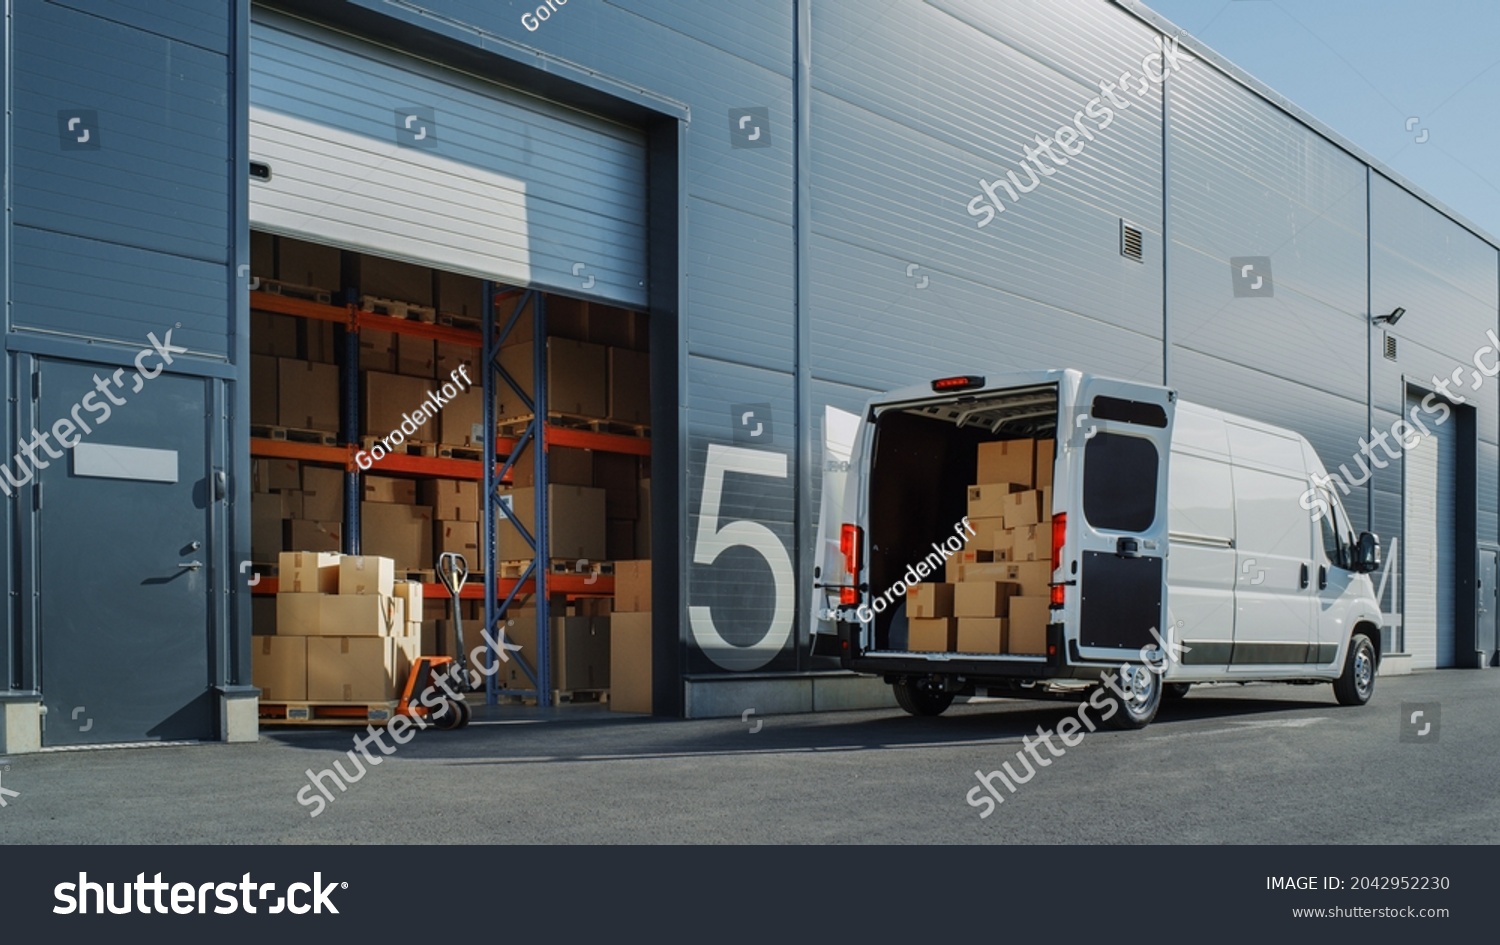 Outside of Logistics Warehouse with Open Door, Delivery Van Loaded with Cardboard Boxes. Truck Delivering Online Orders, Purchases, E-Commerce Goods, Wholesale Merchandise. #2042952230